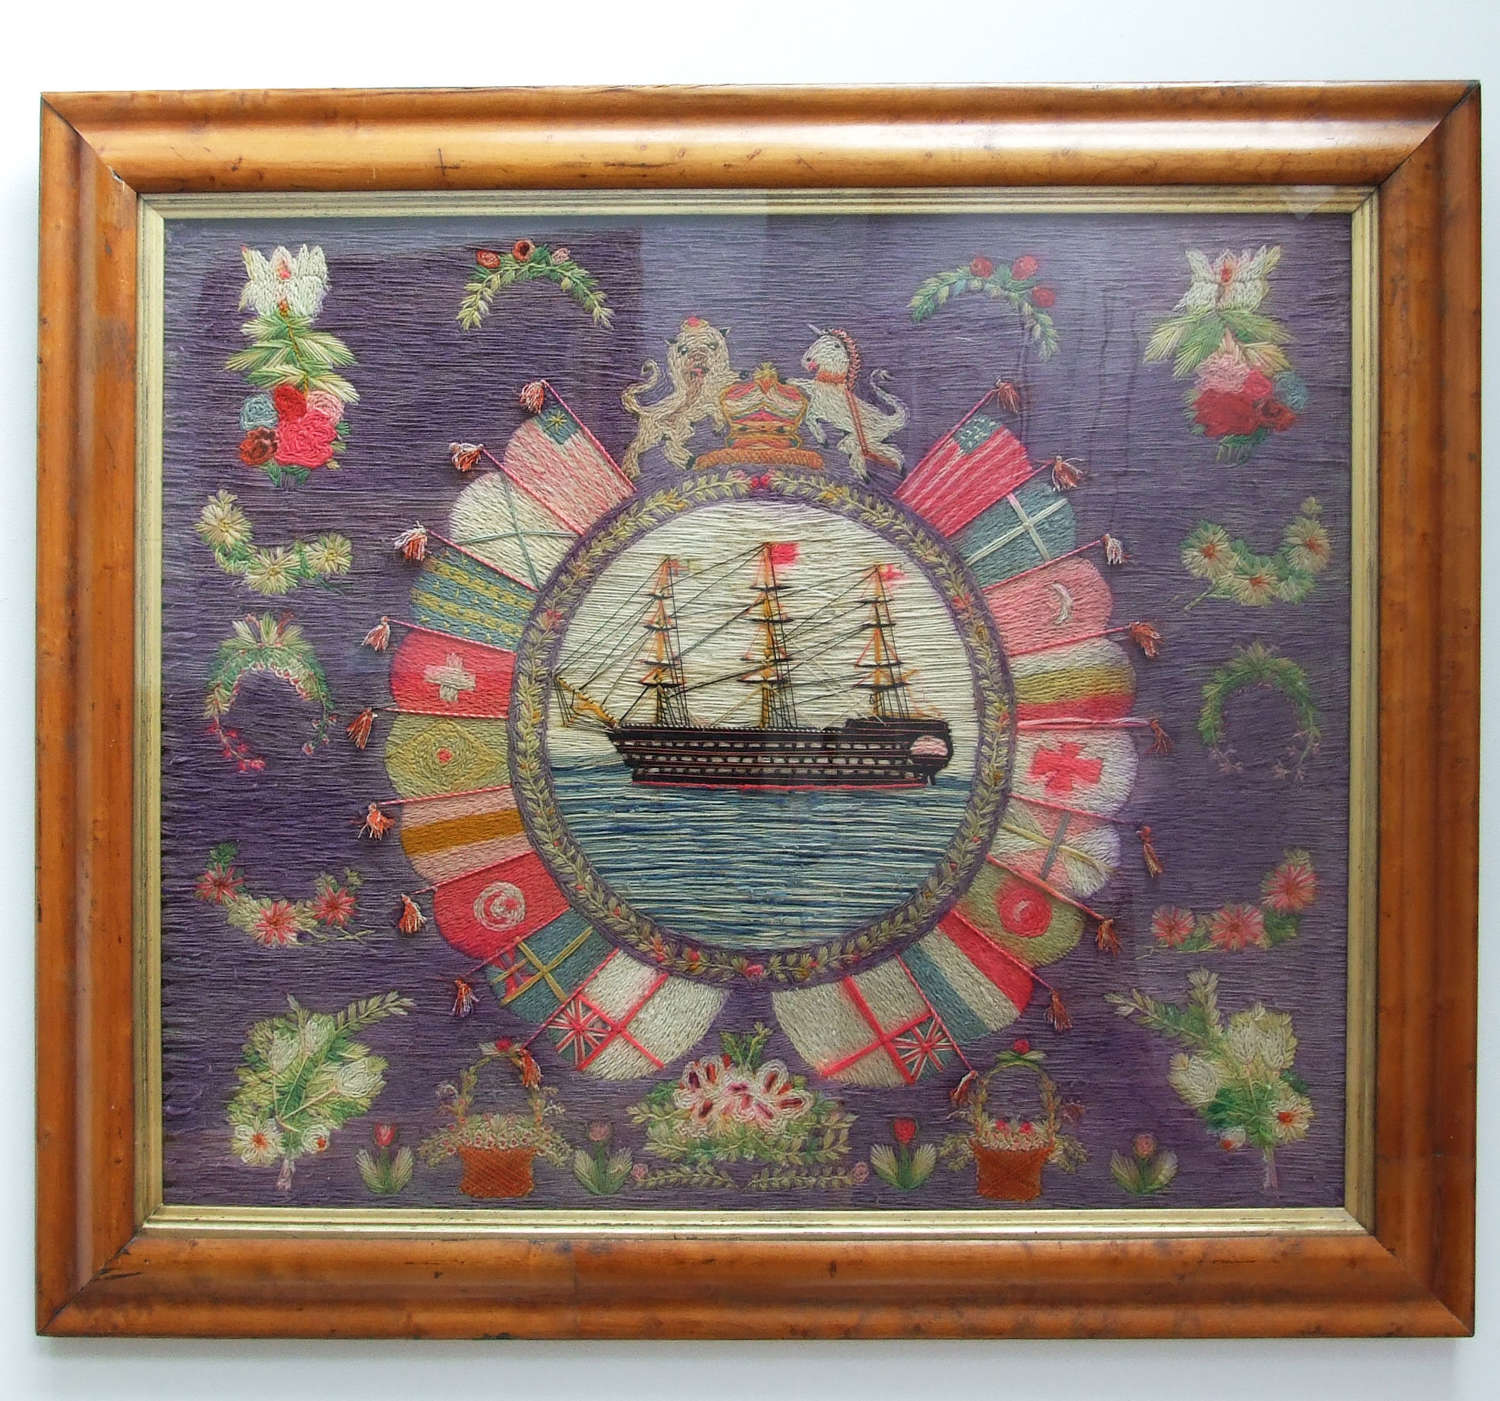 Colourful sailor's woolwork portrait of a Royal Navy ship of the line.